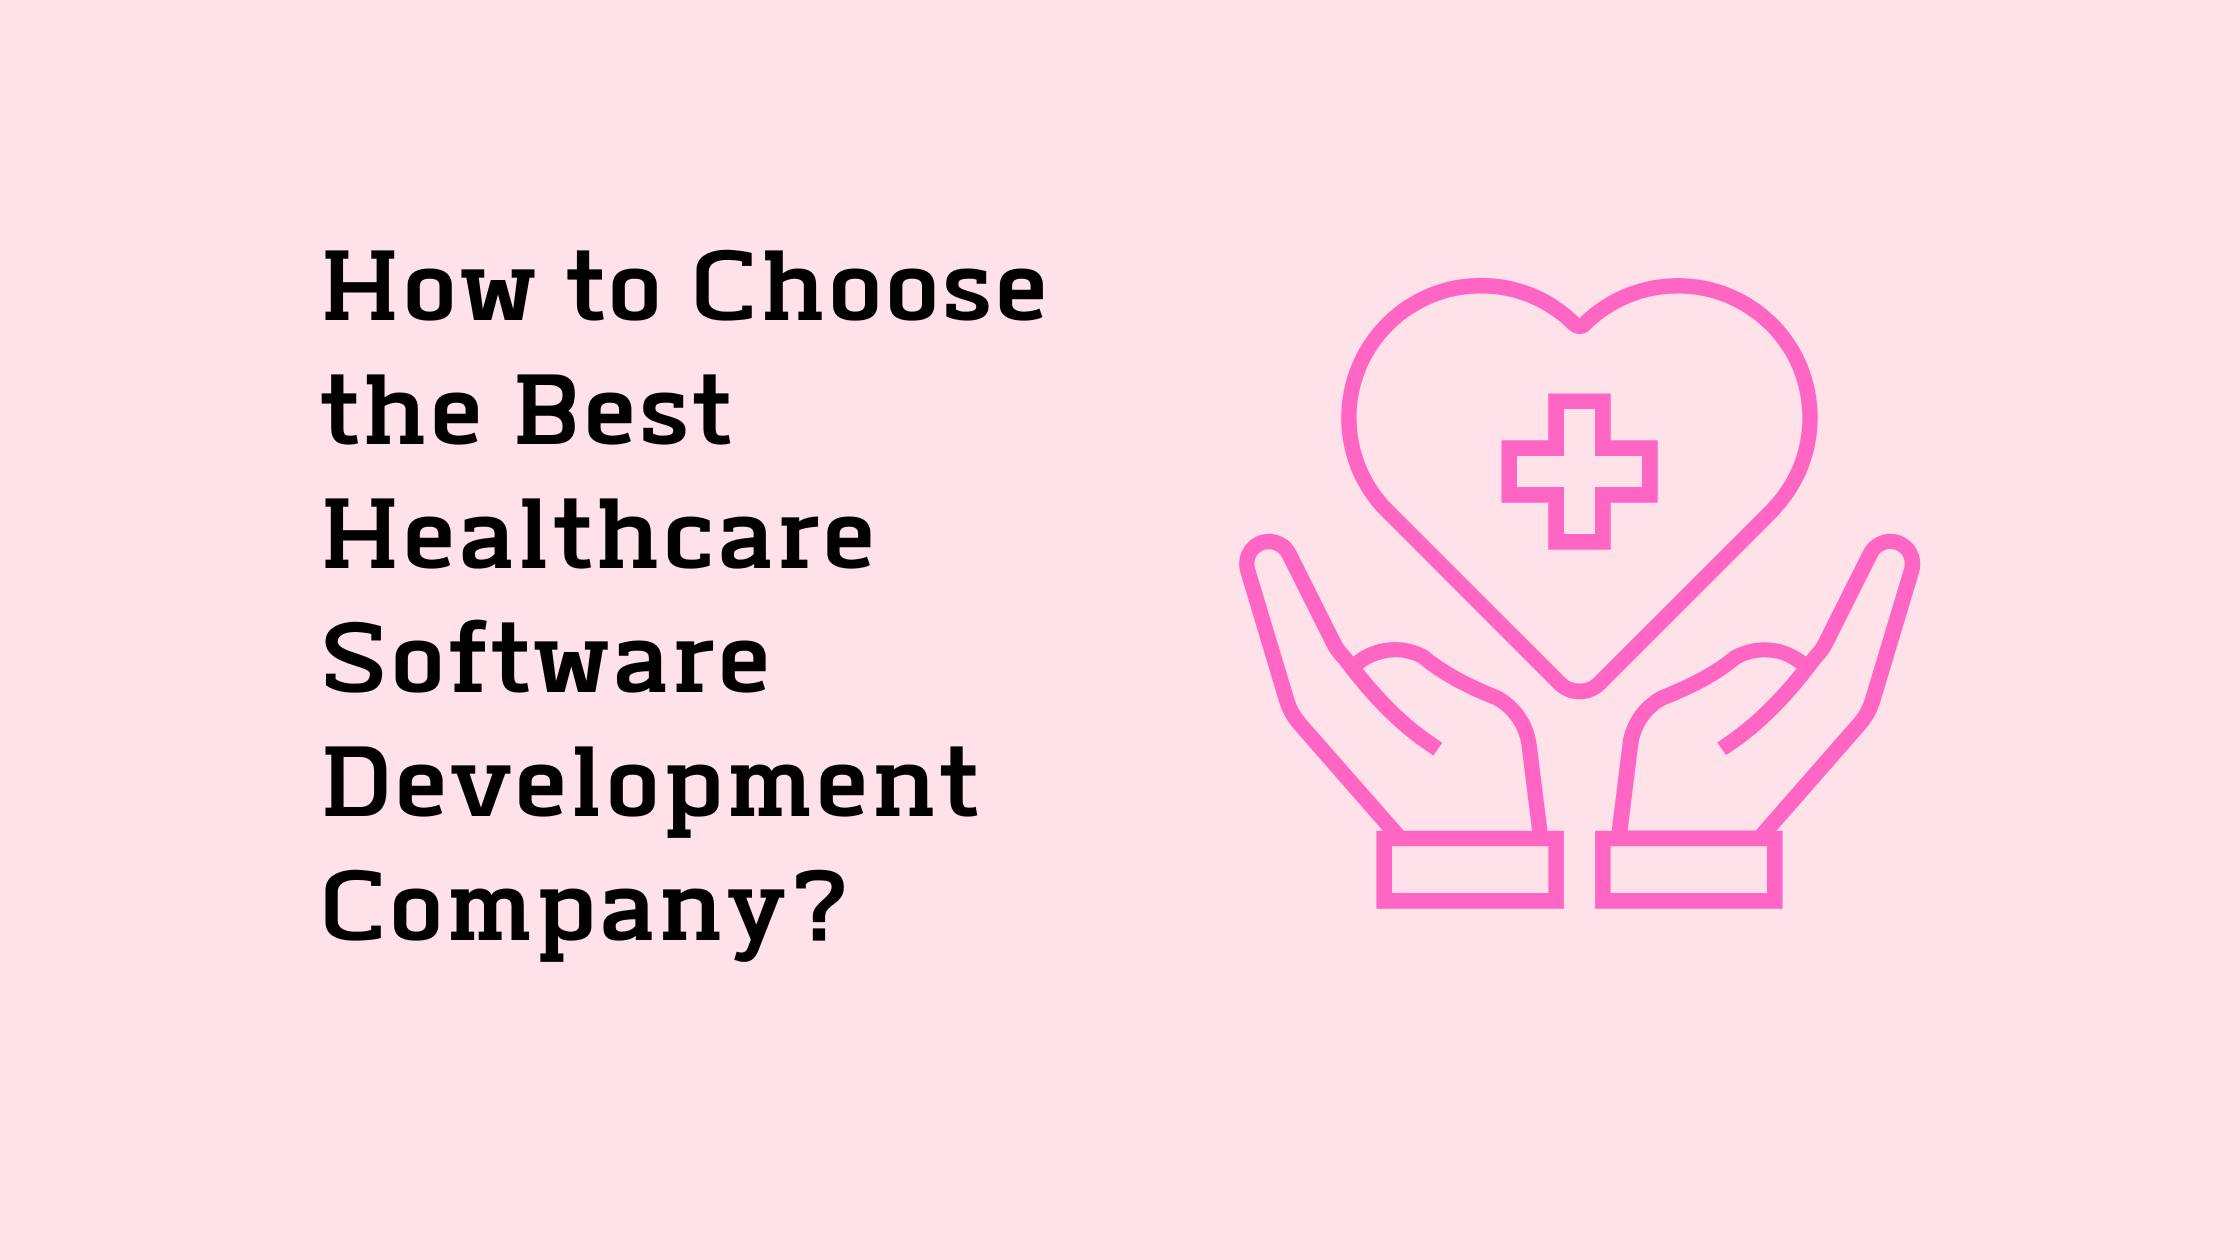 How to Choose the Best Healthcare Software Development Company